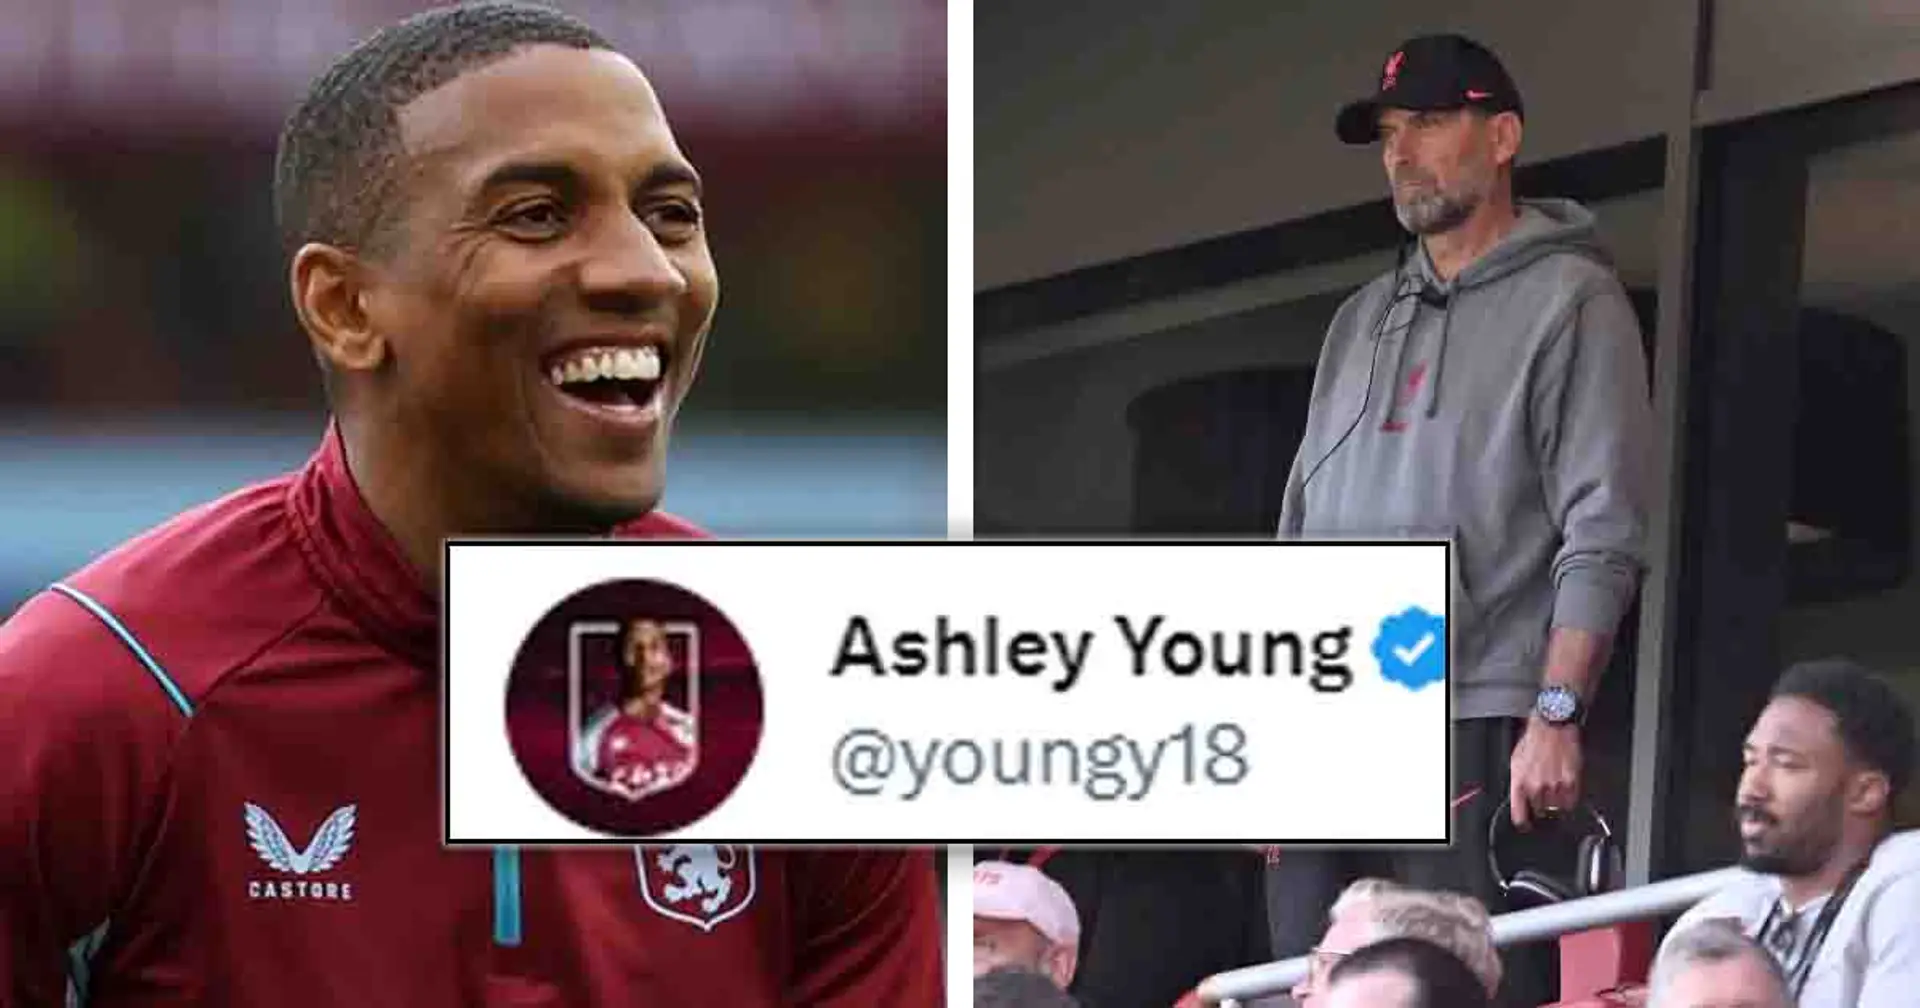 'OOPS': Ashley Young takes brilliant dig at Liverpool after ruining their top-4 hopes